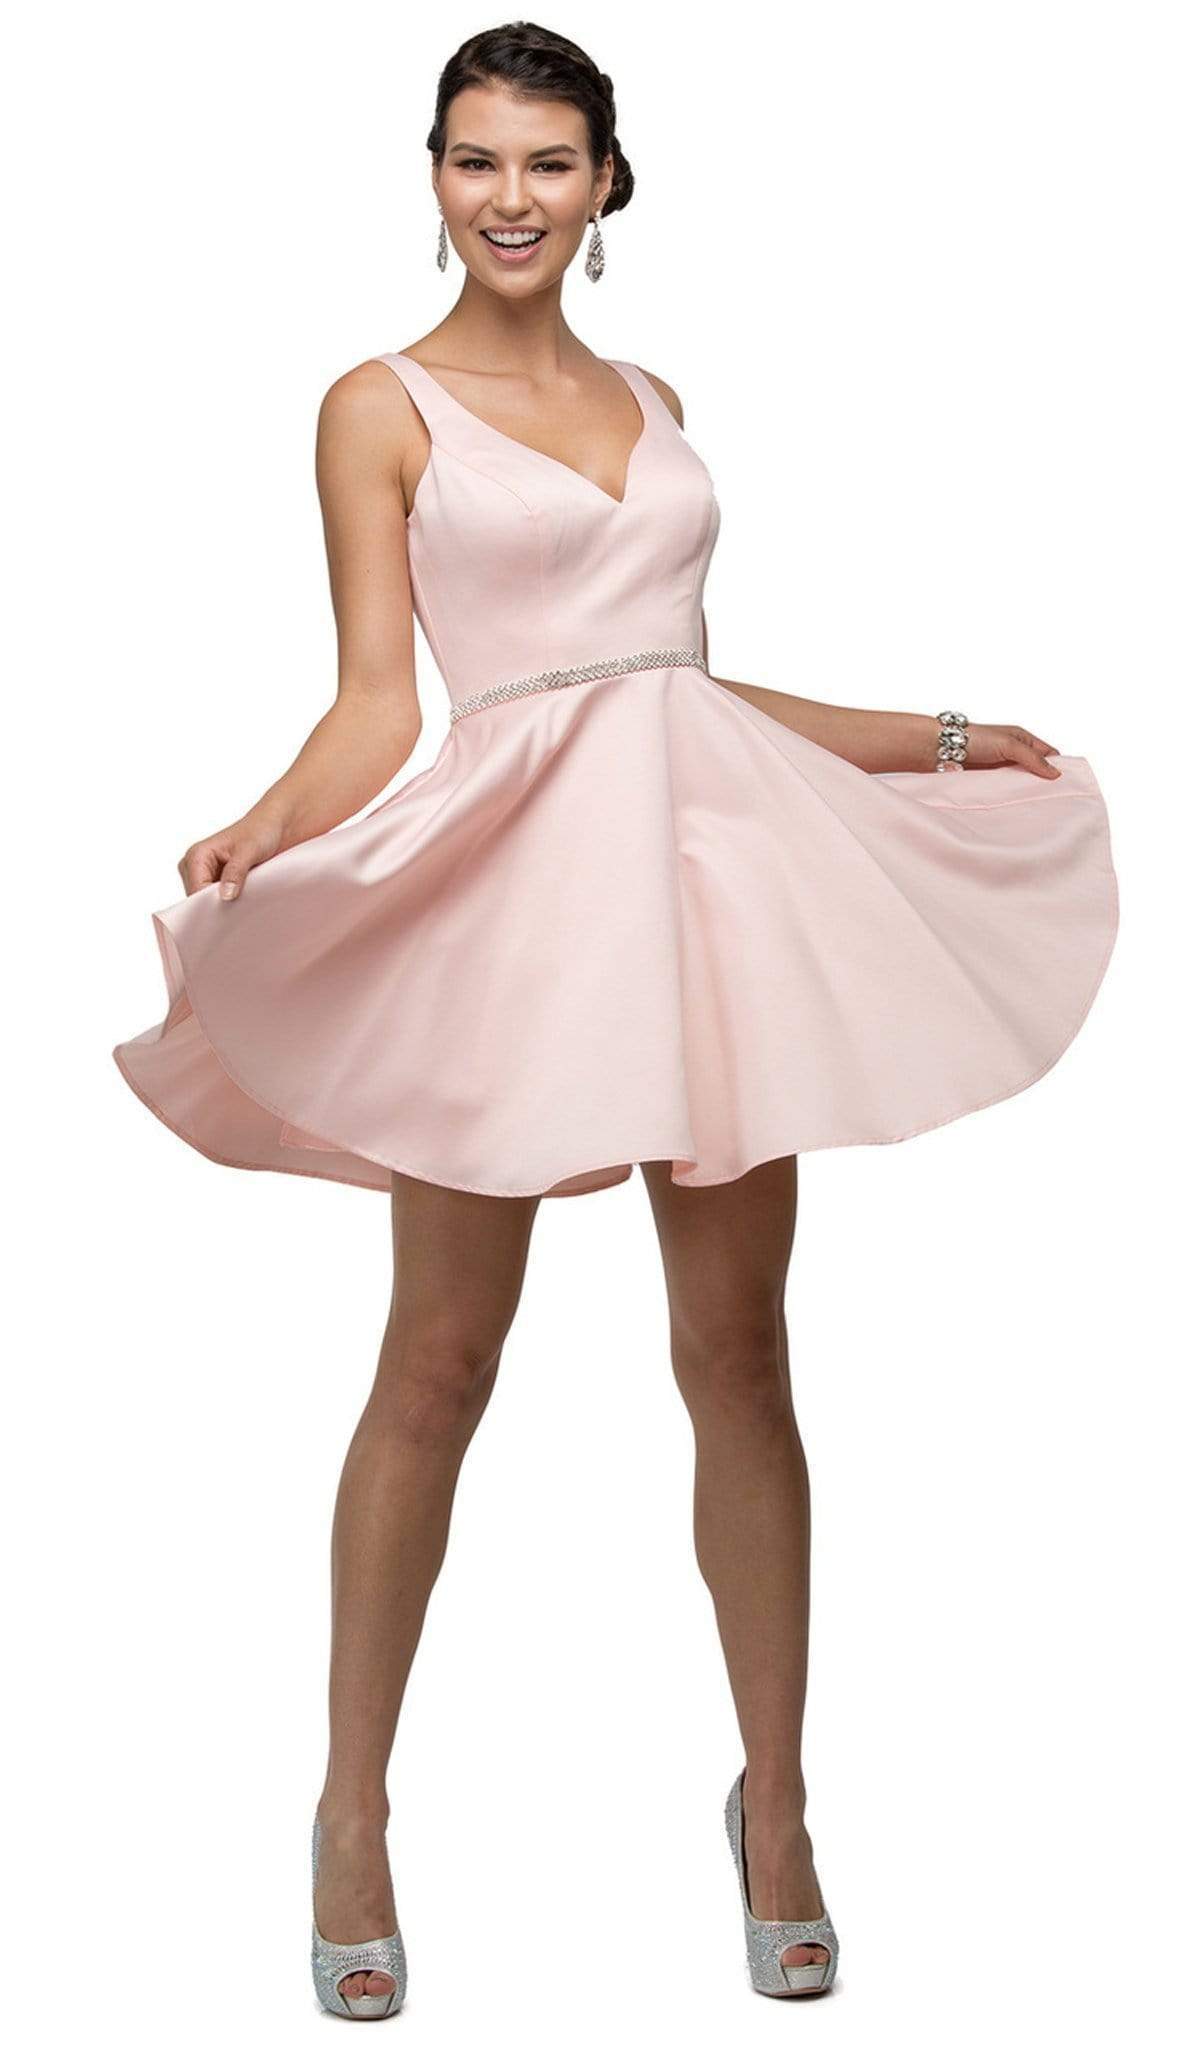 Dancing Queen - 9504 Sleeveless Sweetheart Satin Bejeweled Cocktail Dress Cocktail Dresses XS / Blush